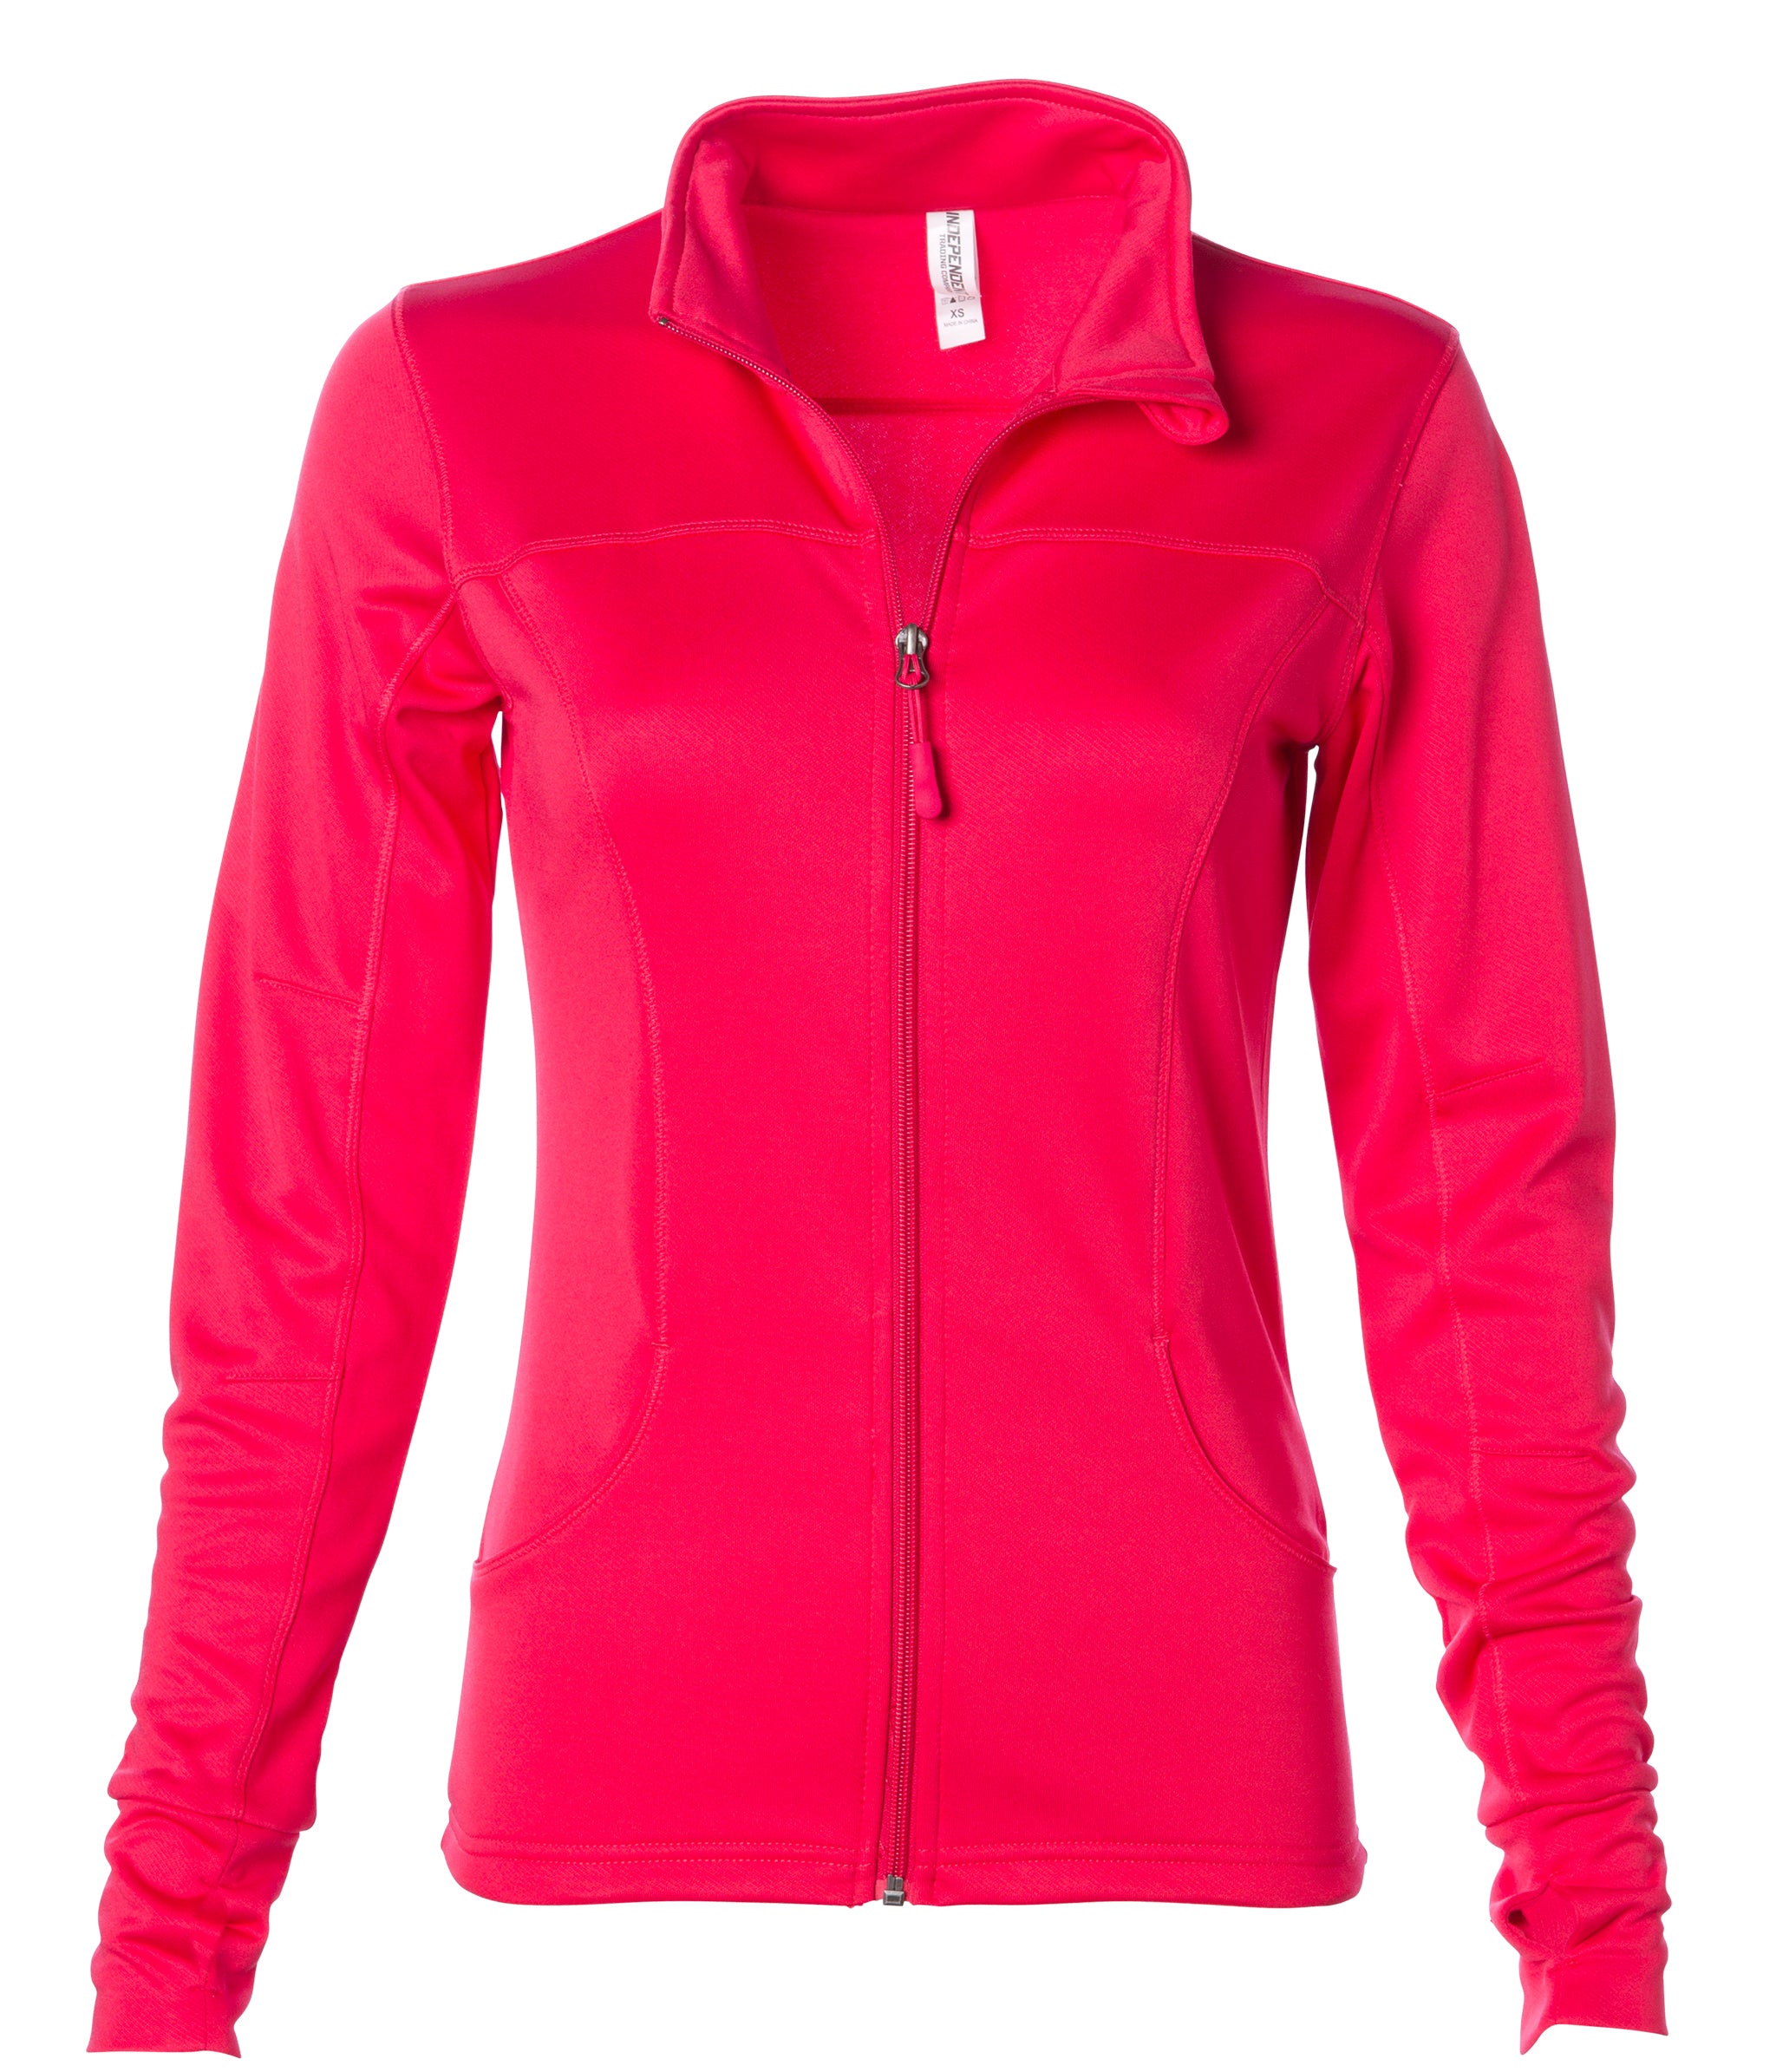 Womens Lightweight Poly-Tech Full Zip | Independent Trading Company